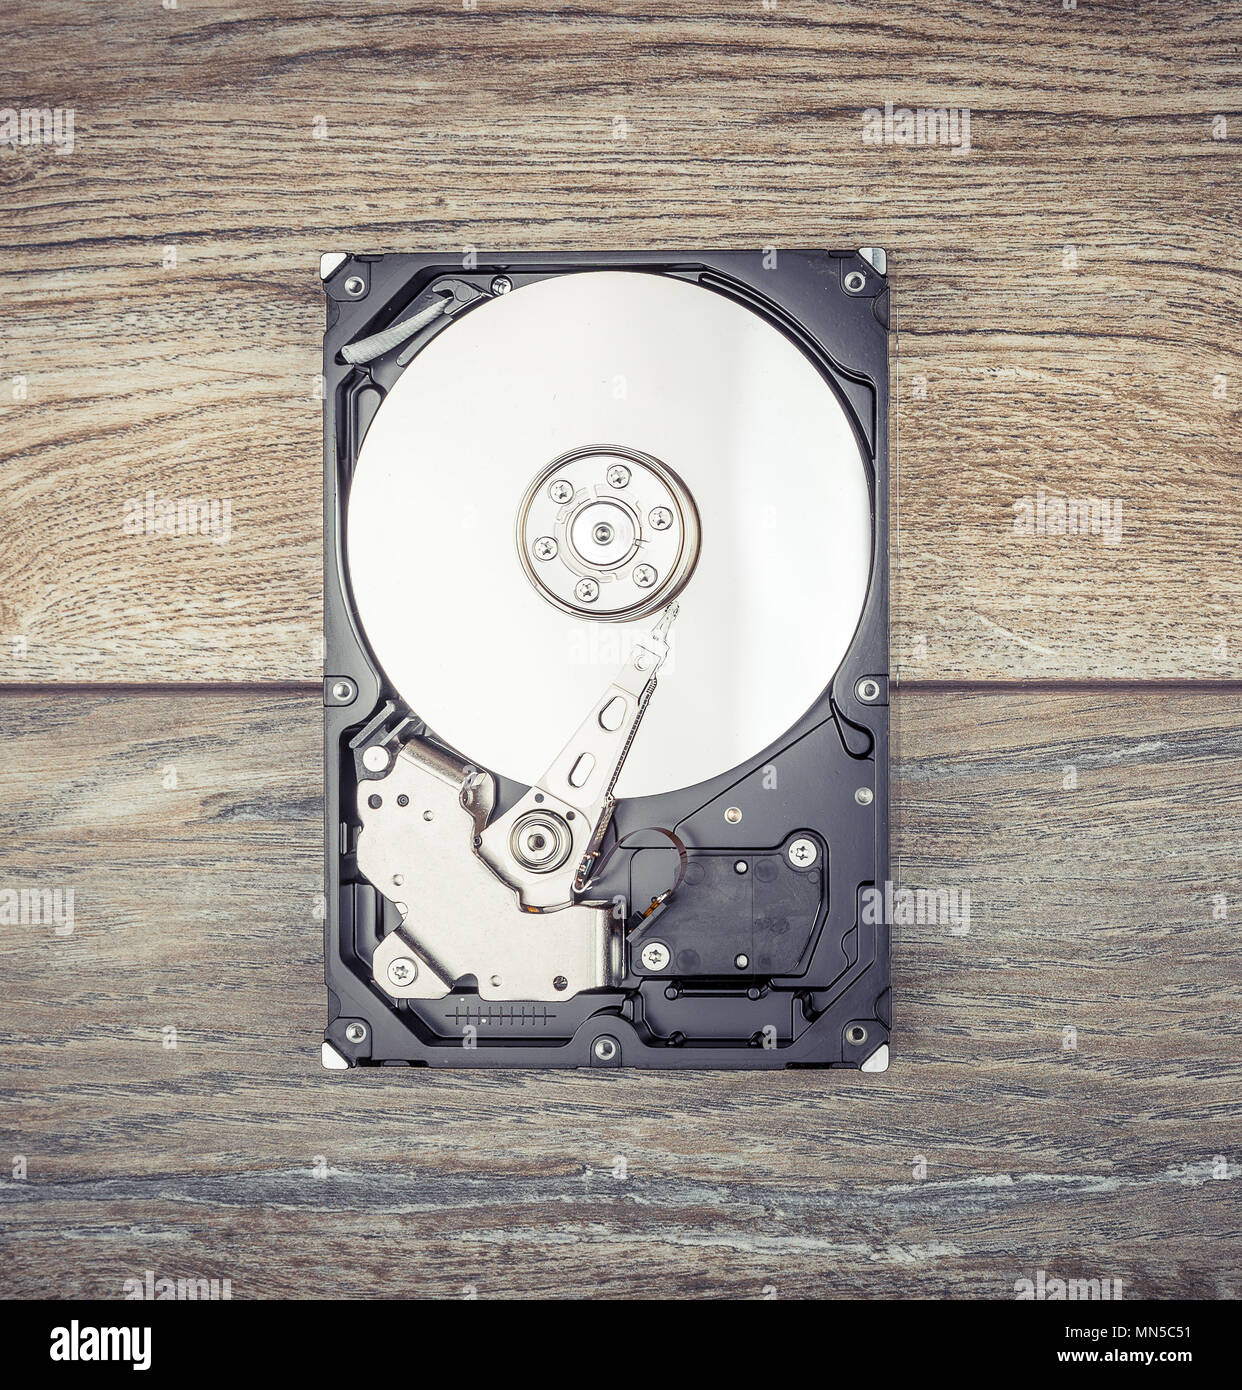 Disassembled Hard drive on wooden table Stock Photo